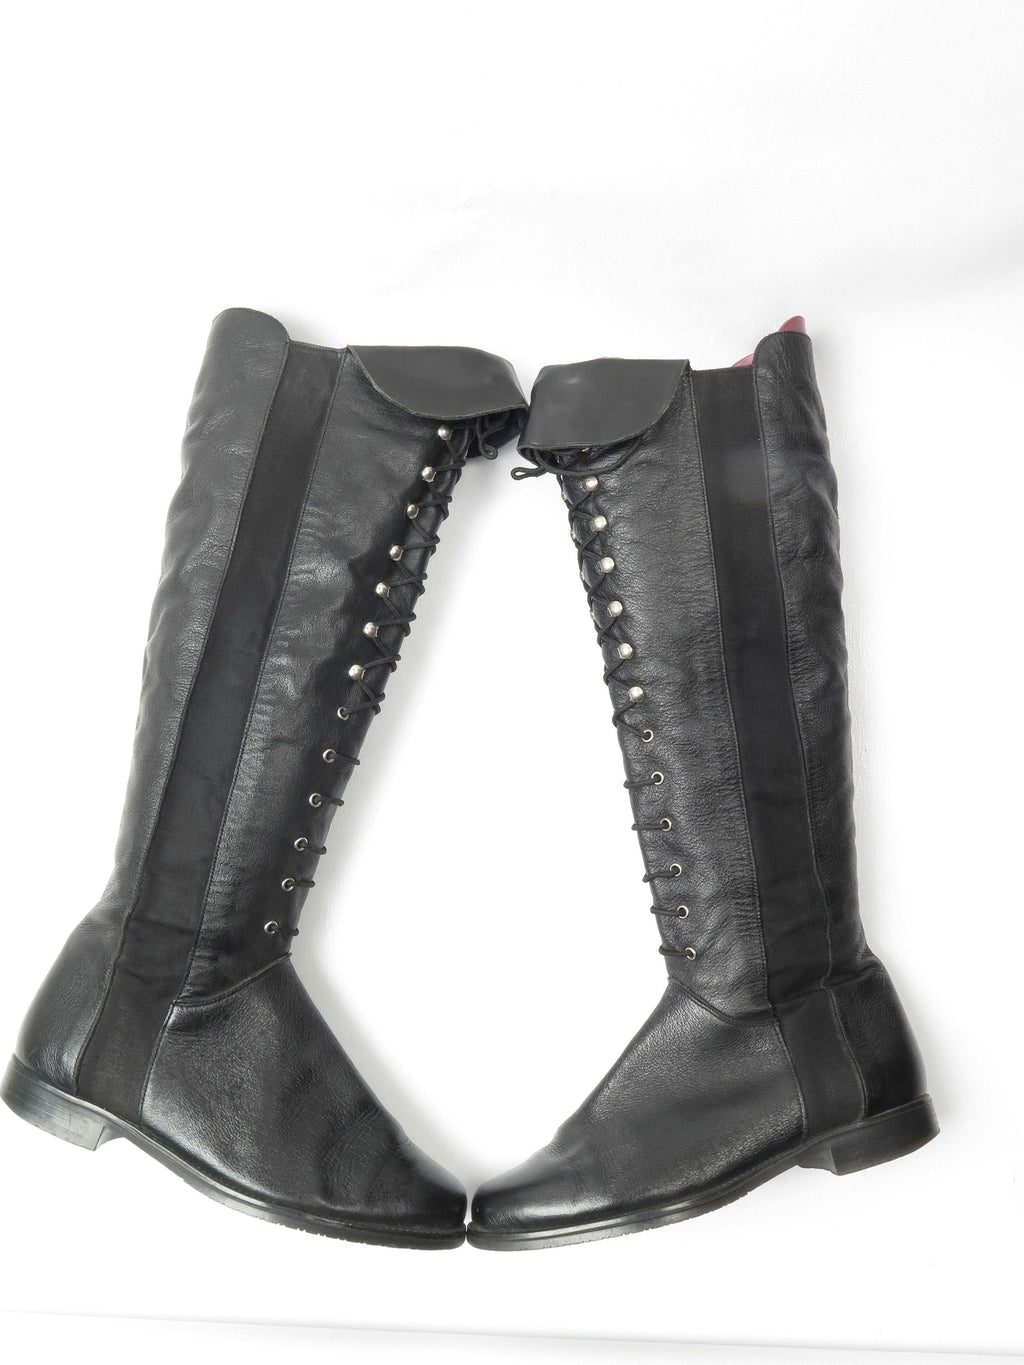 Black Leather Long Boots With Lace Up Hooks 37/4 - The Harlequin